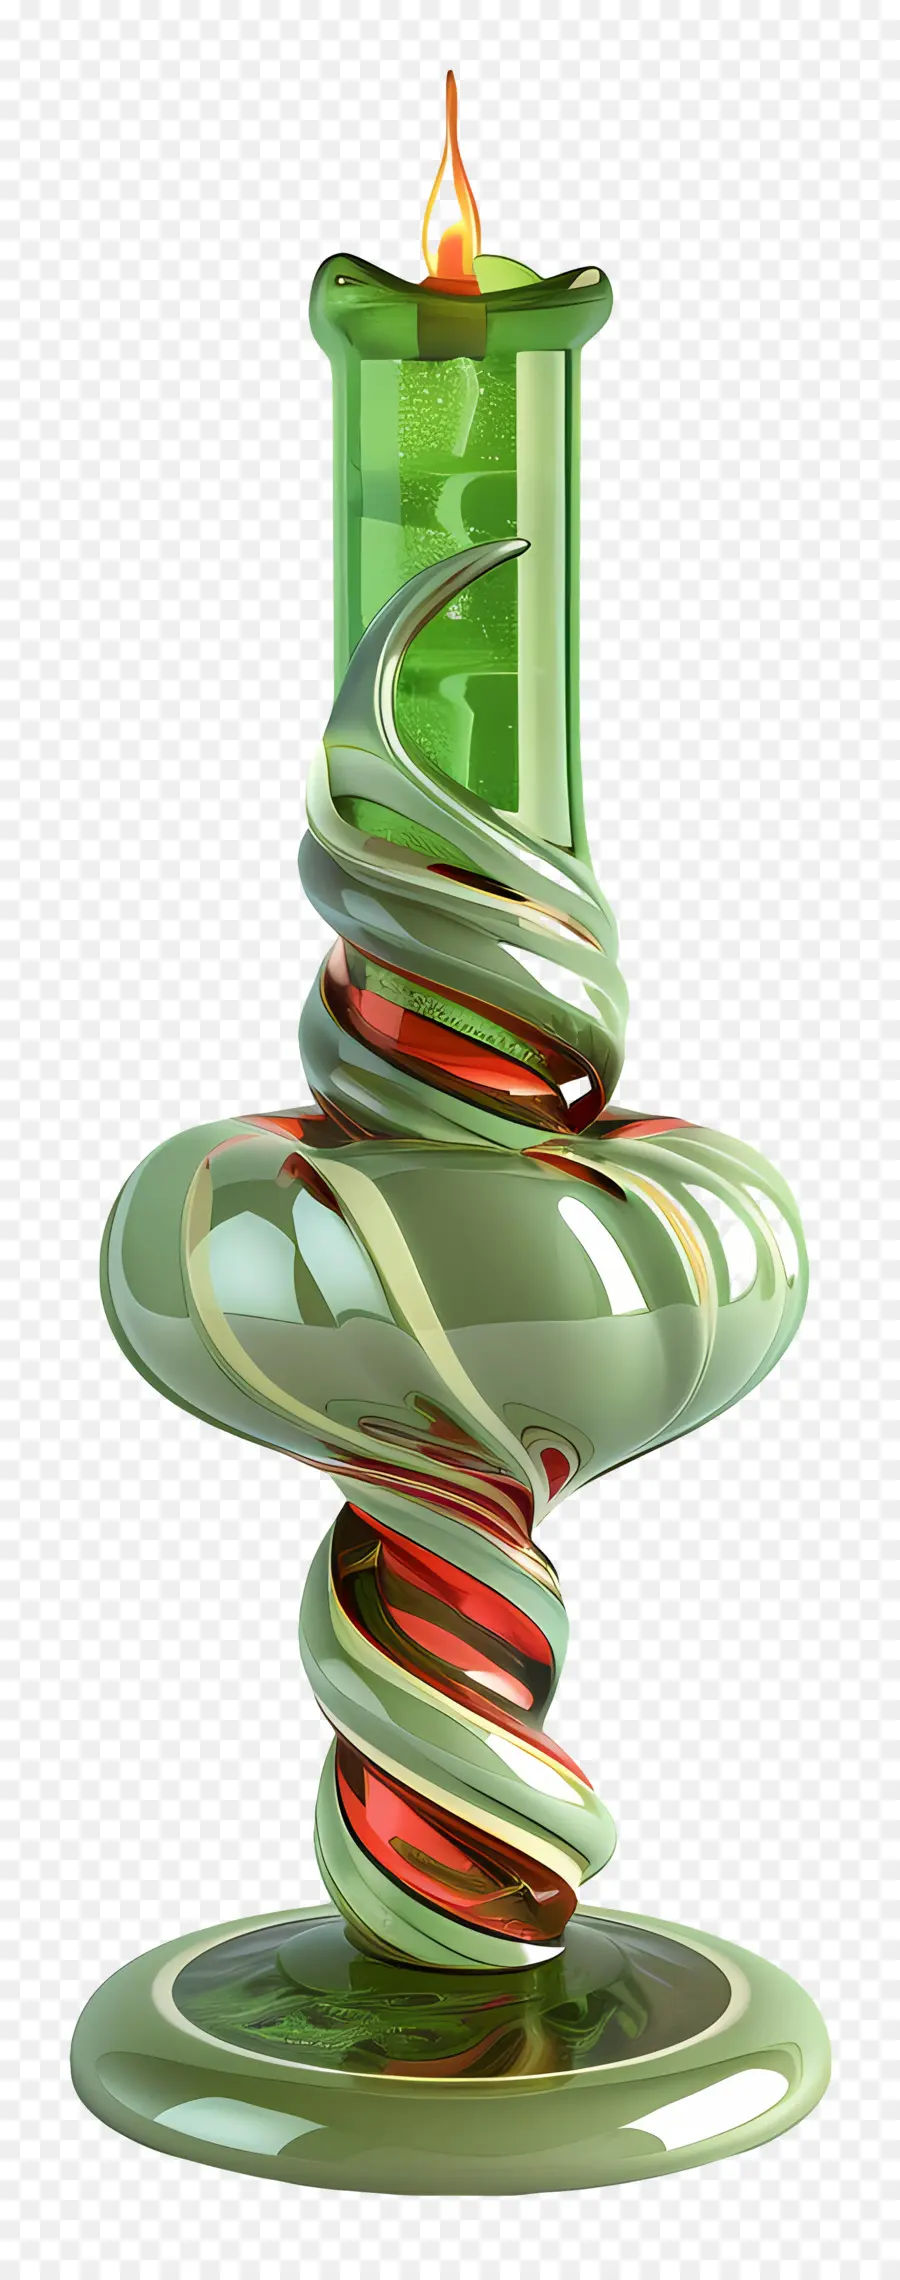 glass candlestick holder glass candle holder green and red swirling design round base